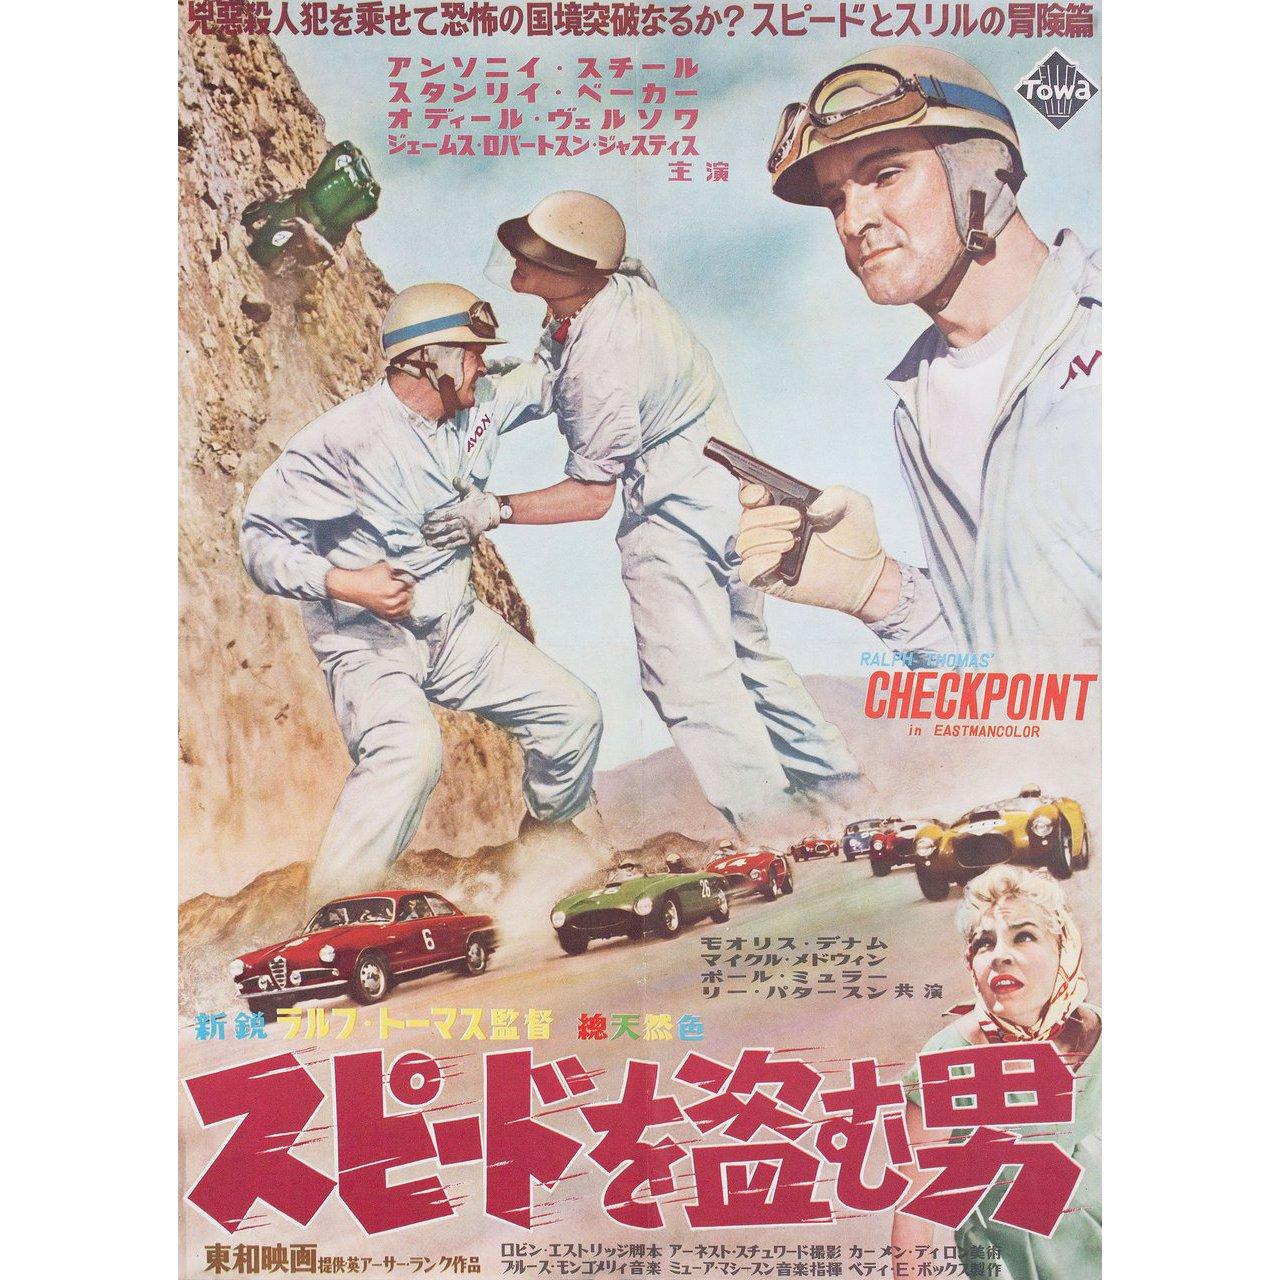 Original 1956 Japanese B2 poster for the film Checkpoint directed by Ralph Thomas with Anthony Steel / Odile Versois / Stanley Baker / James Robertson Justice. Very good fine condition, folded. Many original posters were issued folded or were